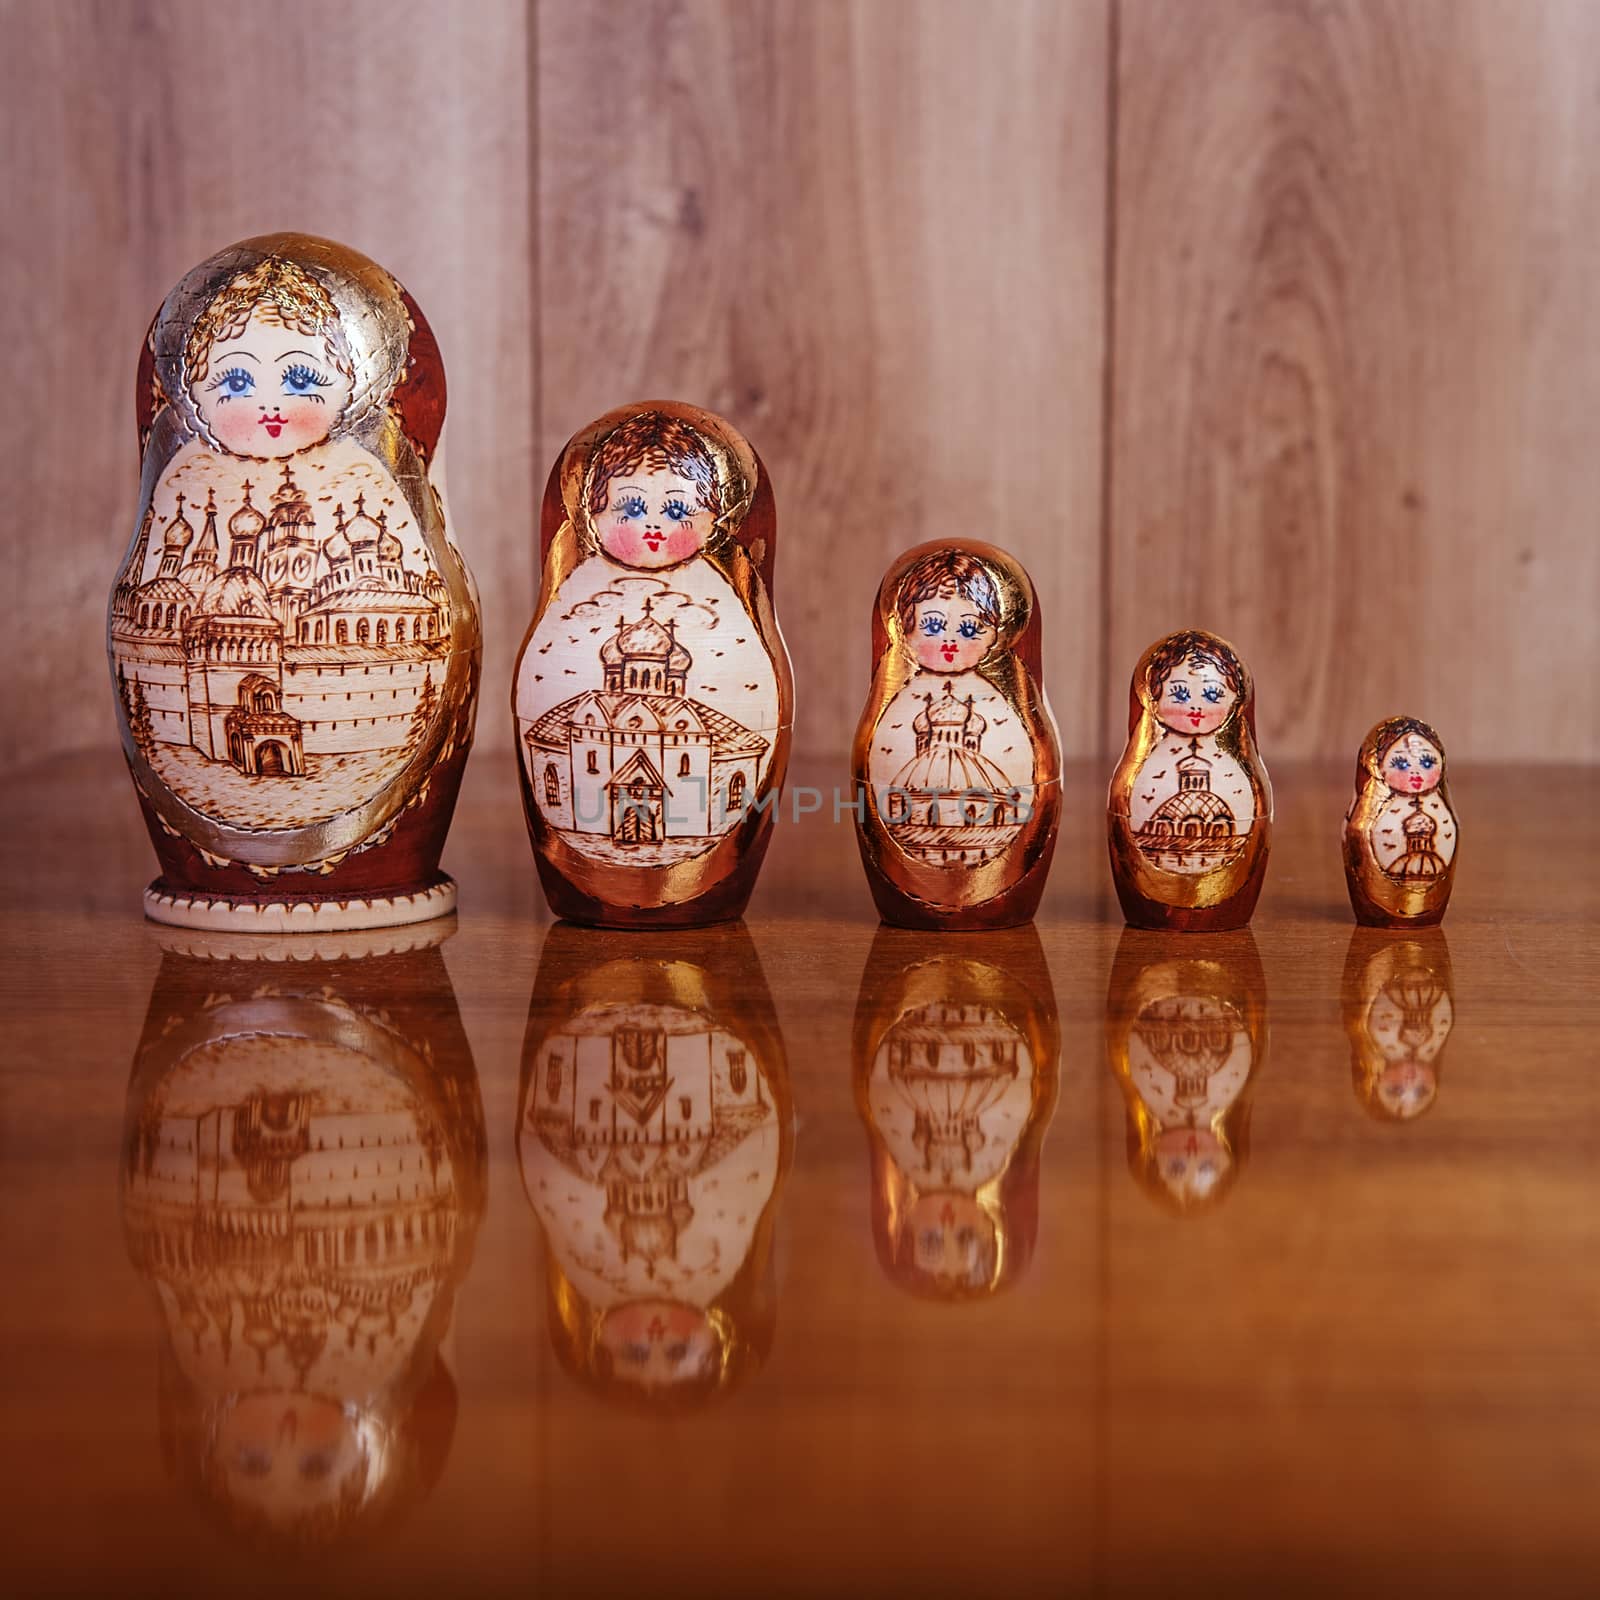 Five dolls on a brown wooden table and a texture on background by natazhekova